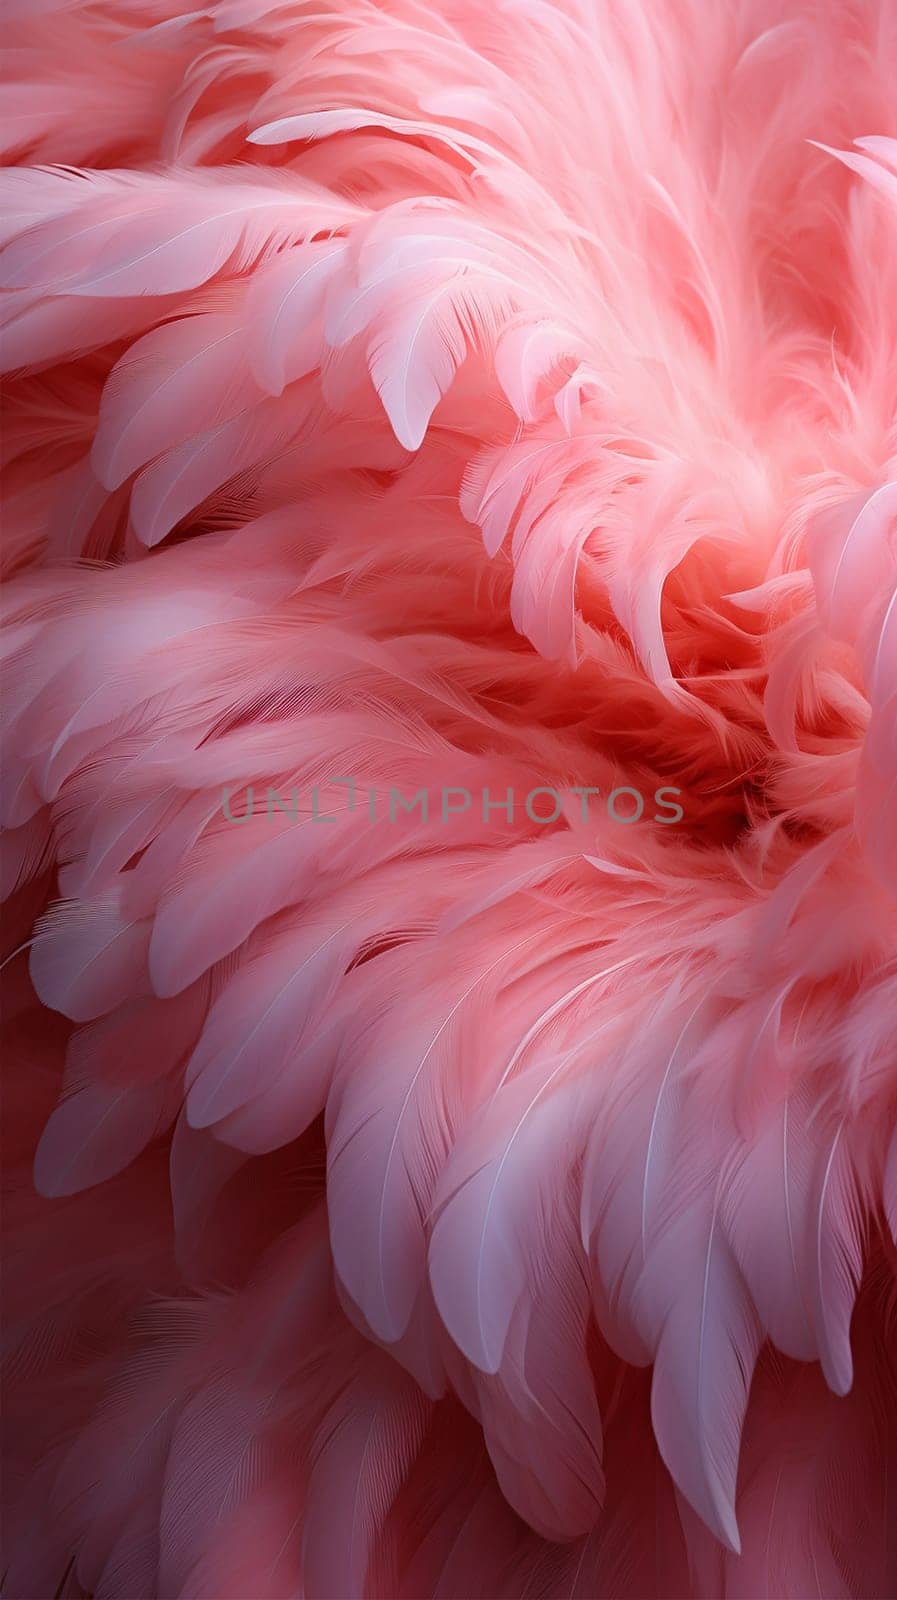 Coral pink vintage flamingo feathers background texture pattern. Beautiful soft pink color trends feather pattern texture background with pink pastel light flare modern design